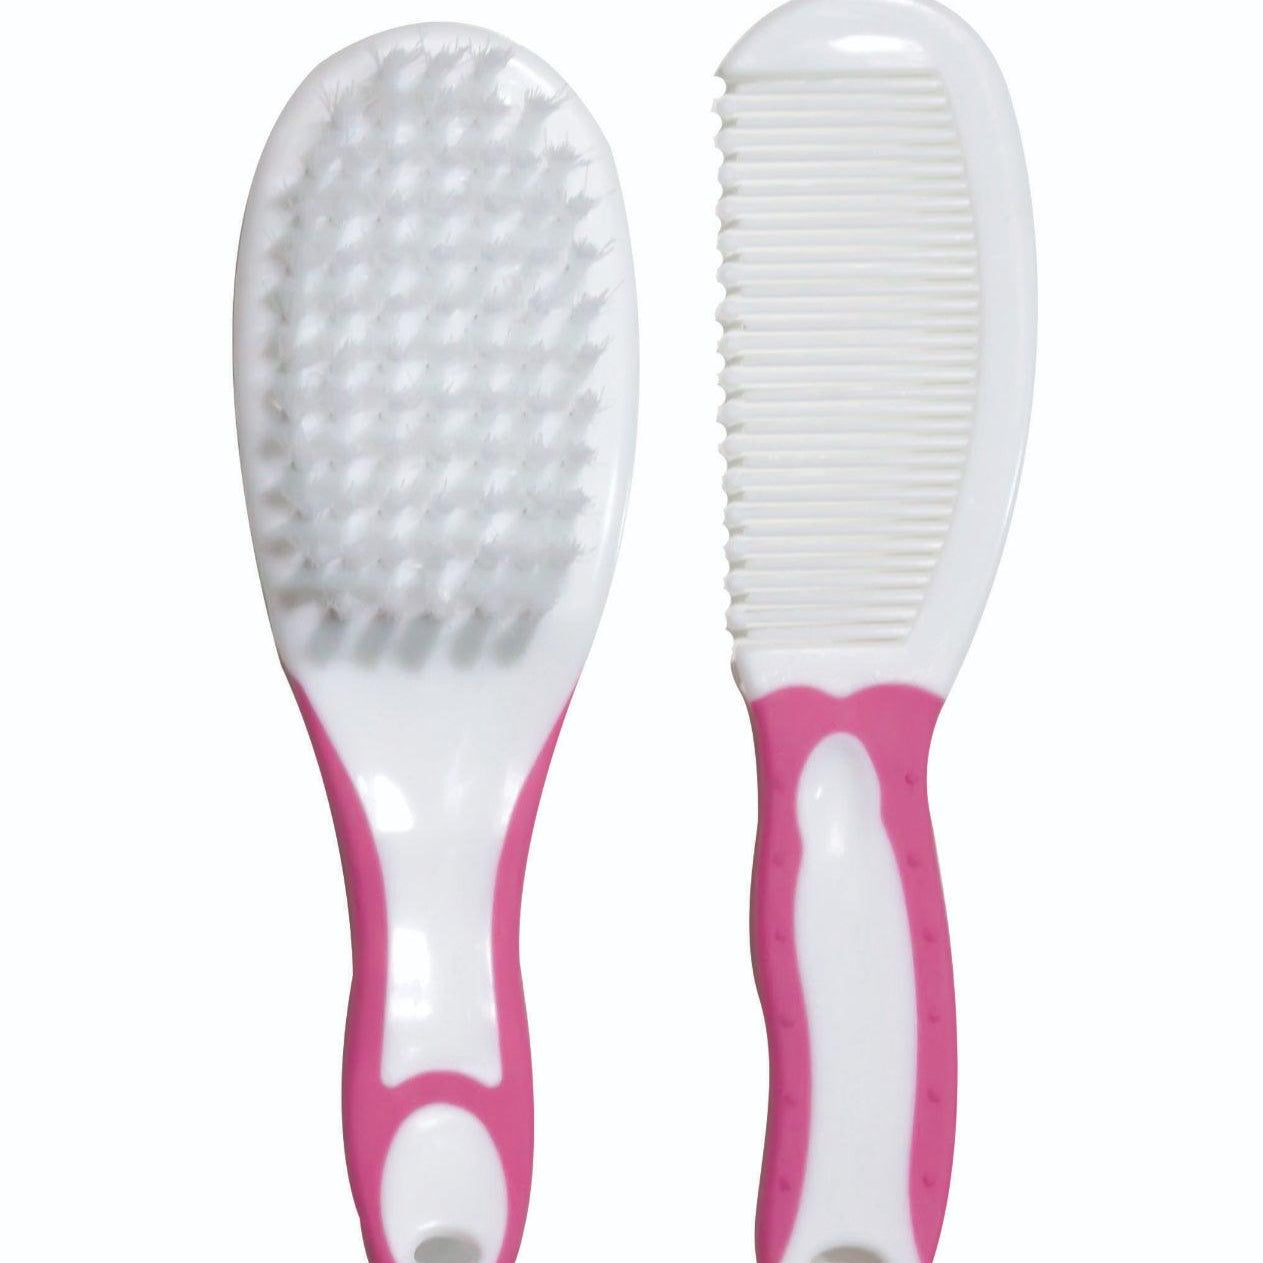 2-Piece Baby Comb and Brush Set - Ourkids - La Frutta